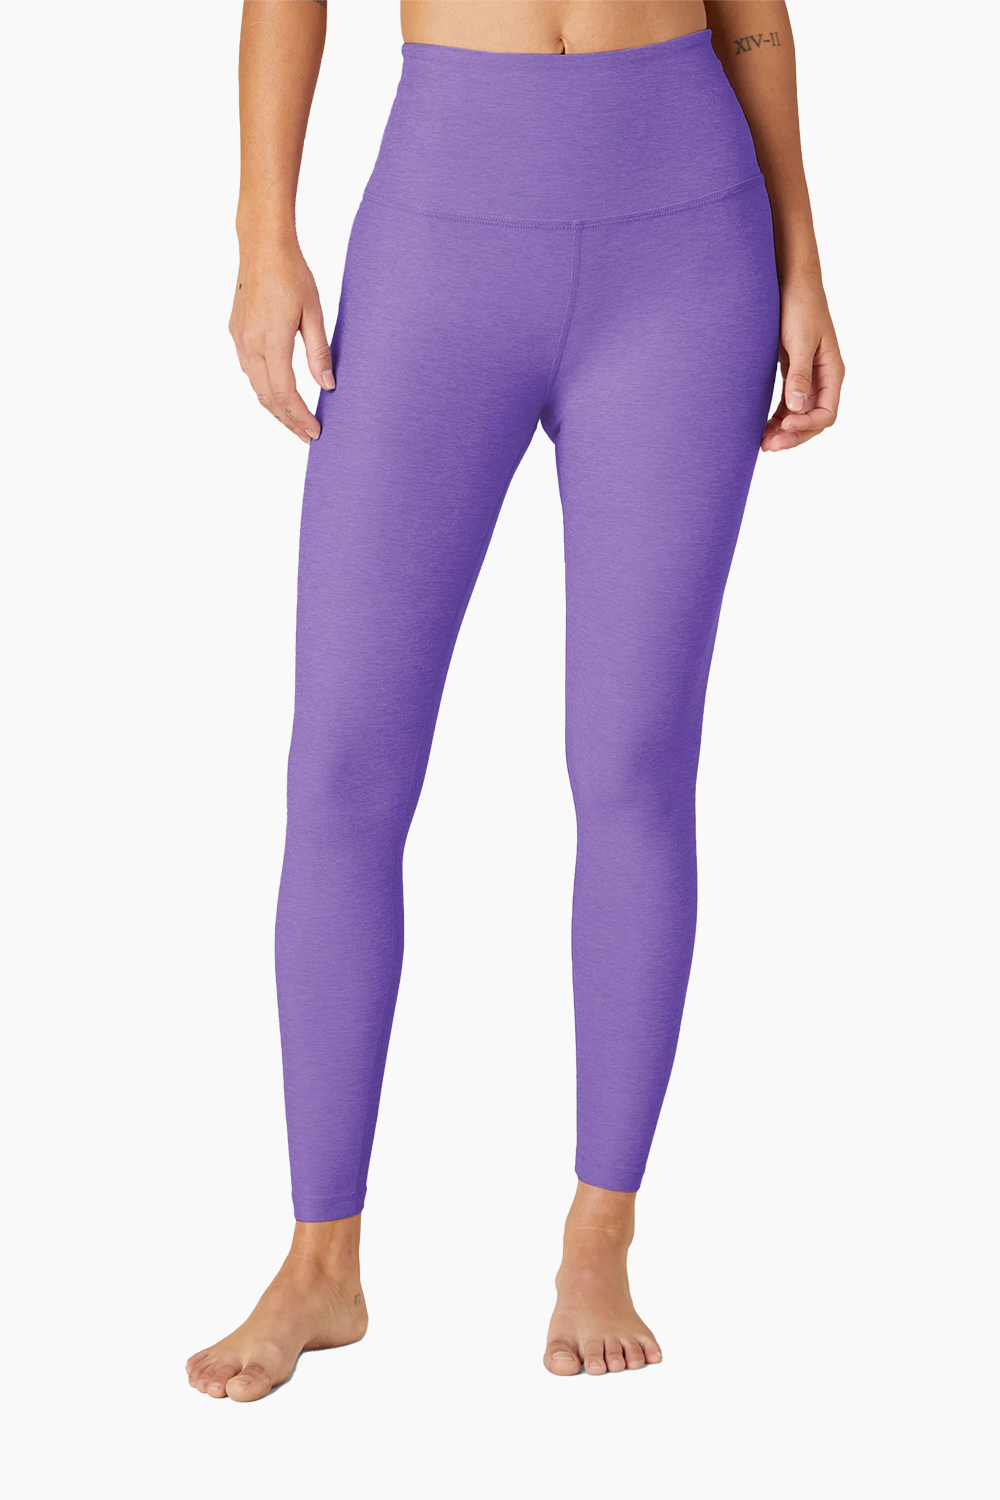 Beyond Yoga Spacedye Caught In The Midi High Waisted Legging in Bright Amethyst